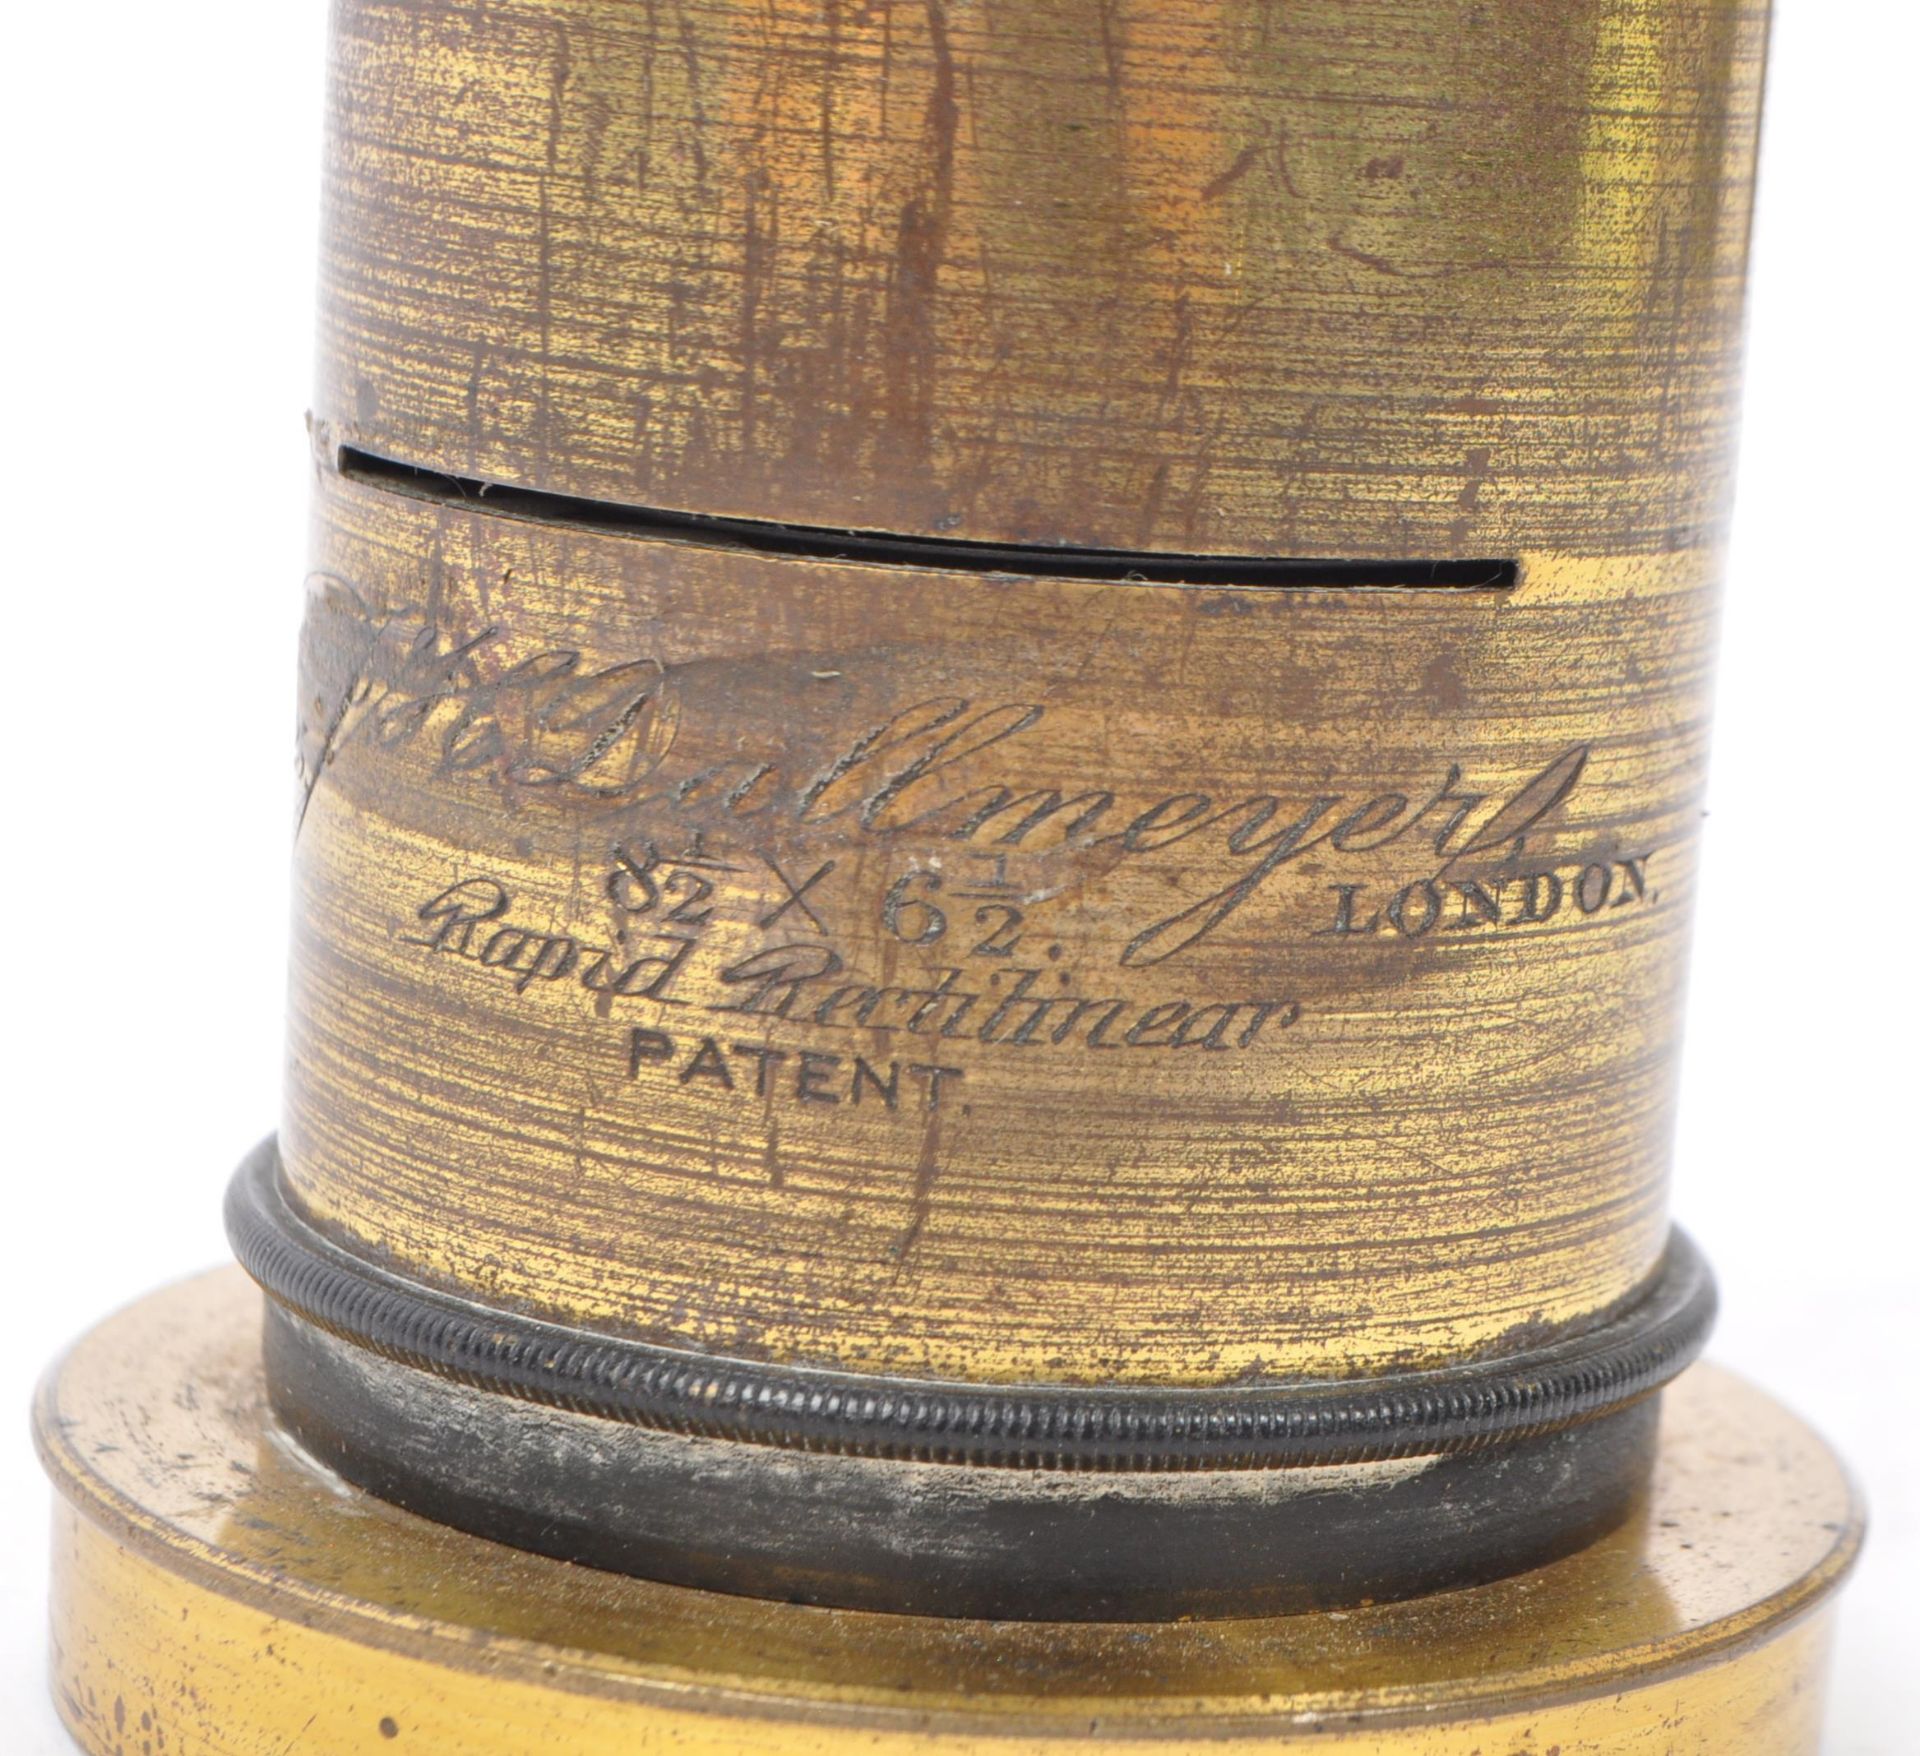 VICTORIAN DALLMEYER BRASS RAPID RECTILINEAR OBJECTIVE LENS - Image 5 of 5